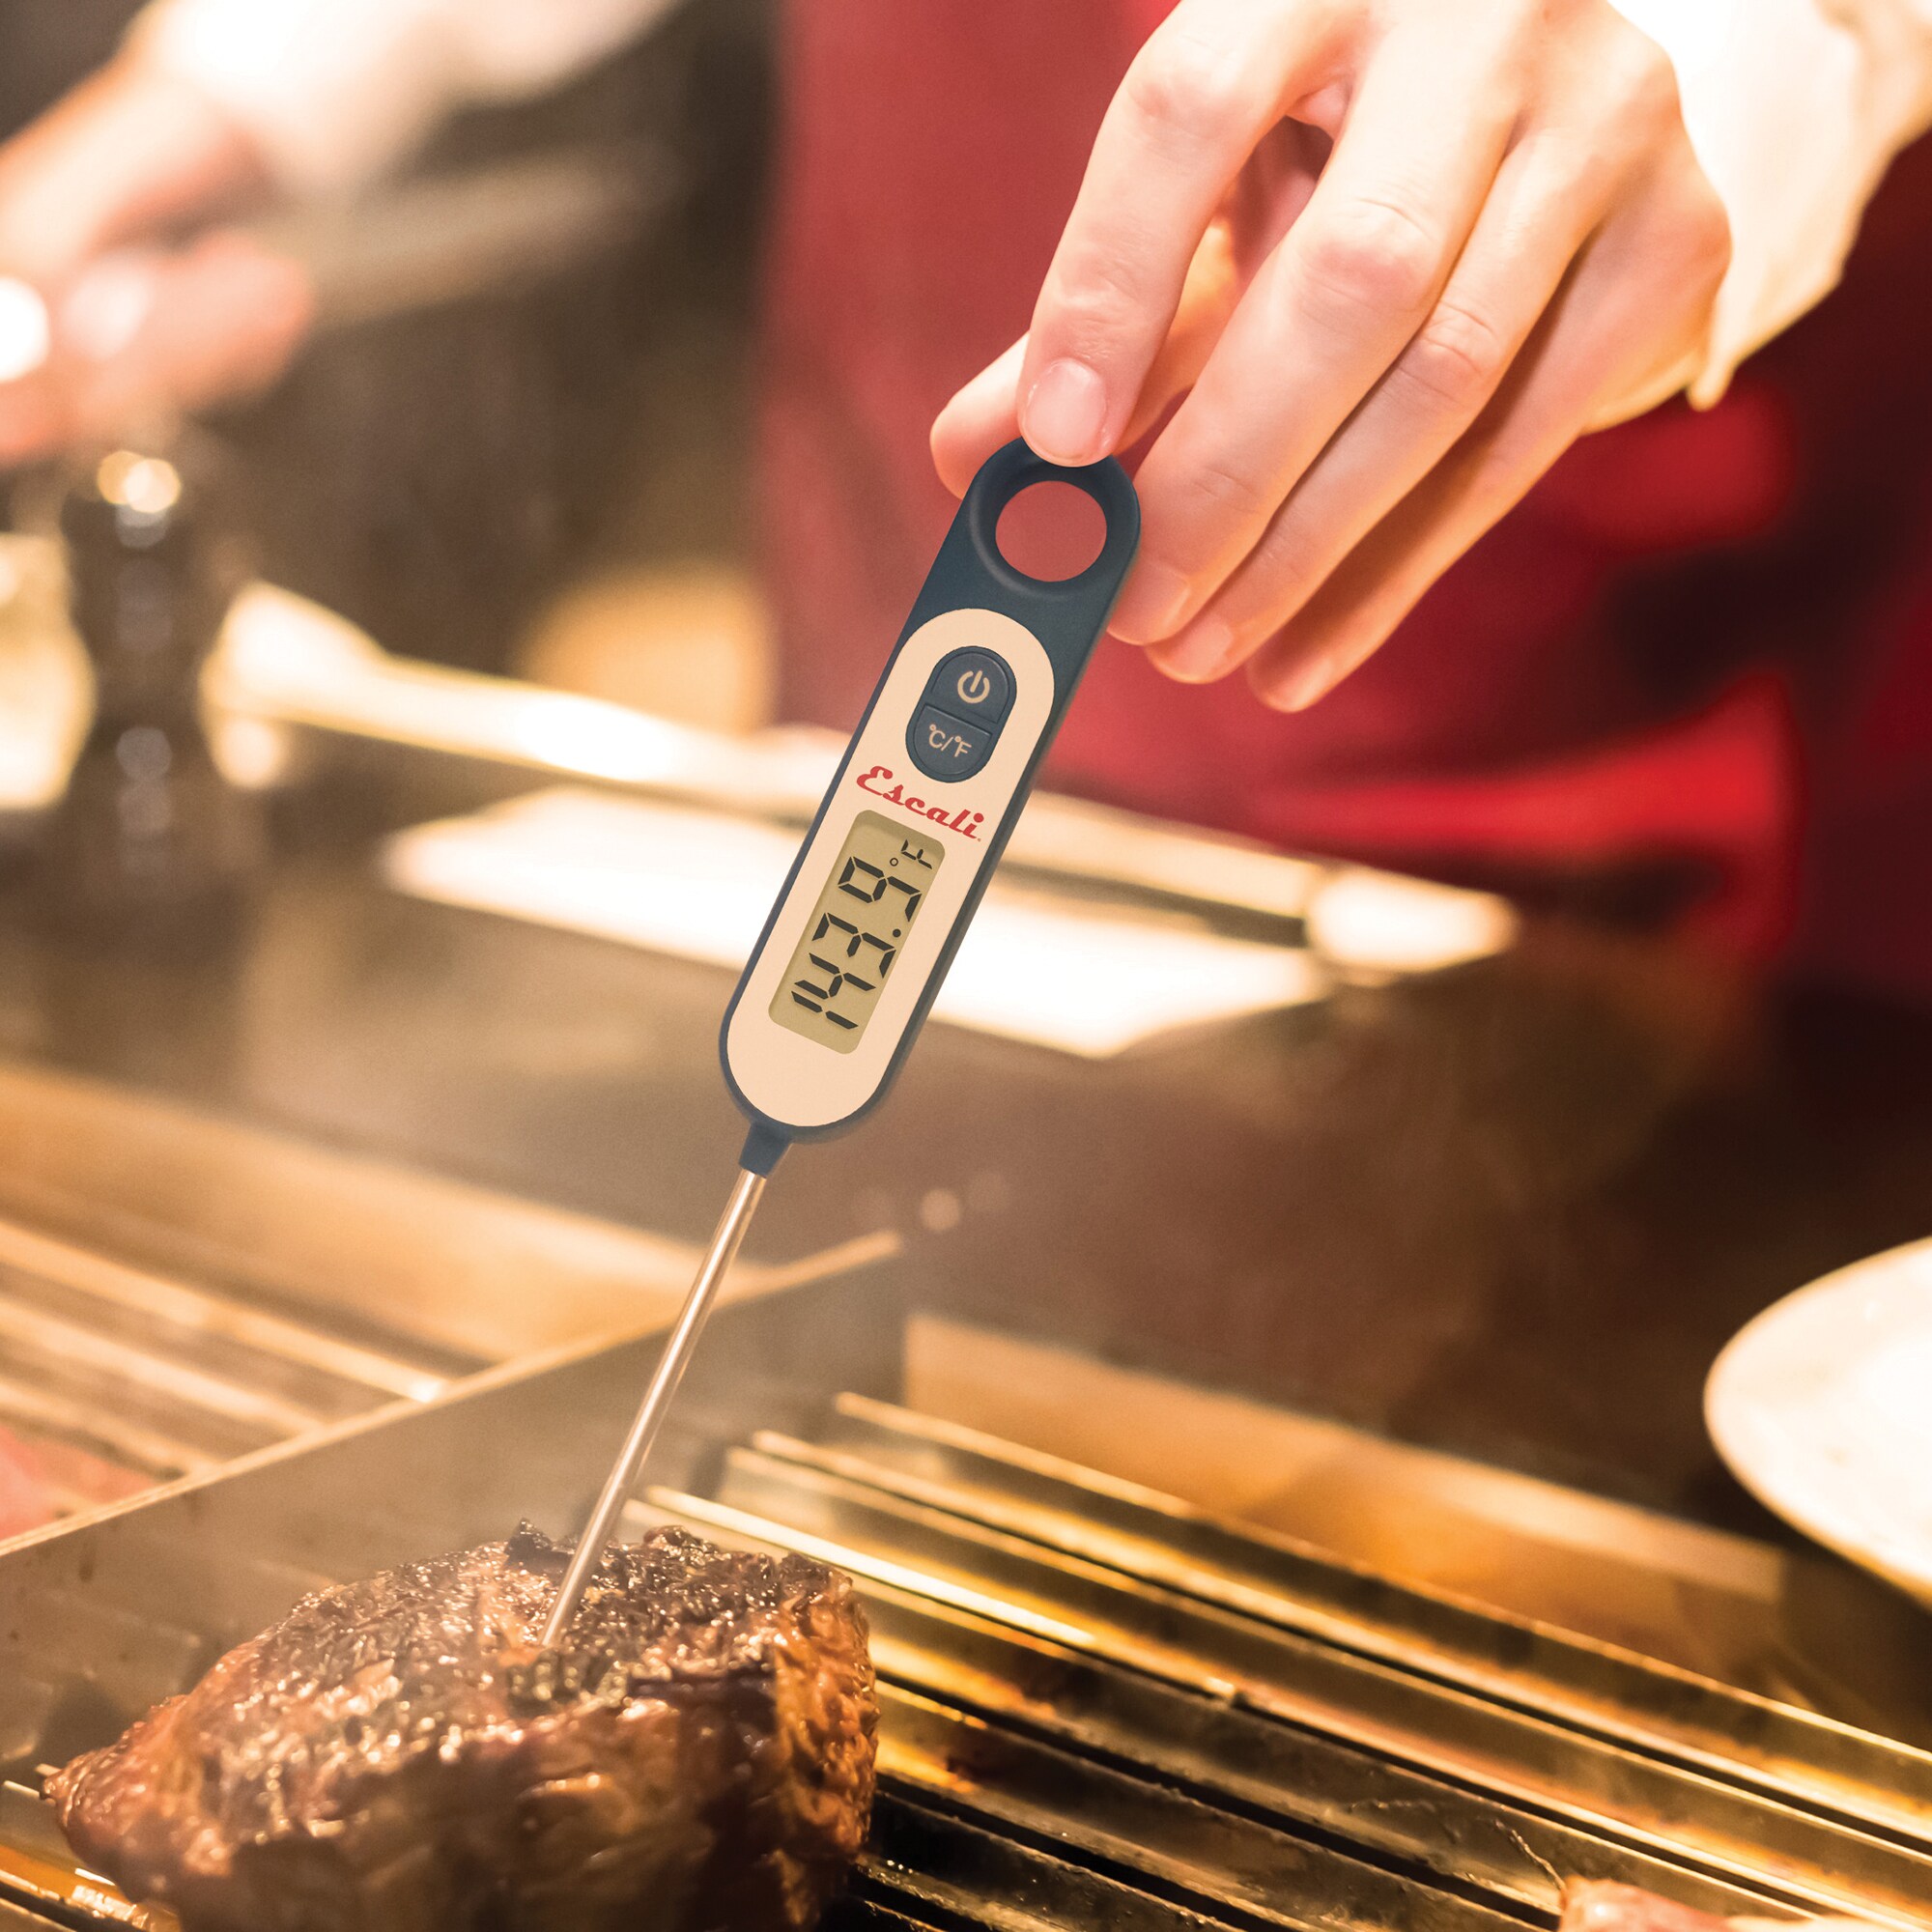 Escali Digital Remote Meat Thermometer in the Meat Thermometers department  at